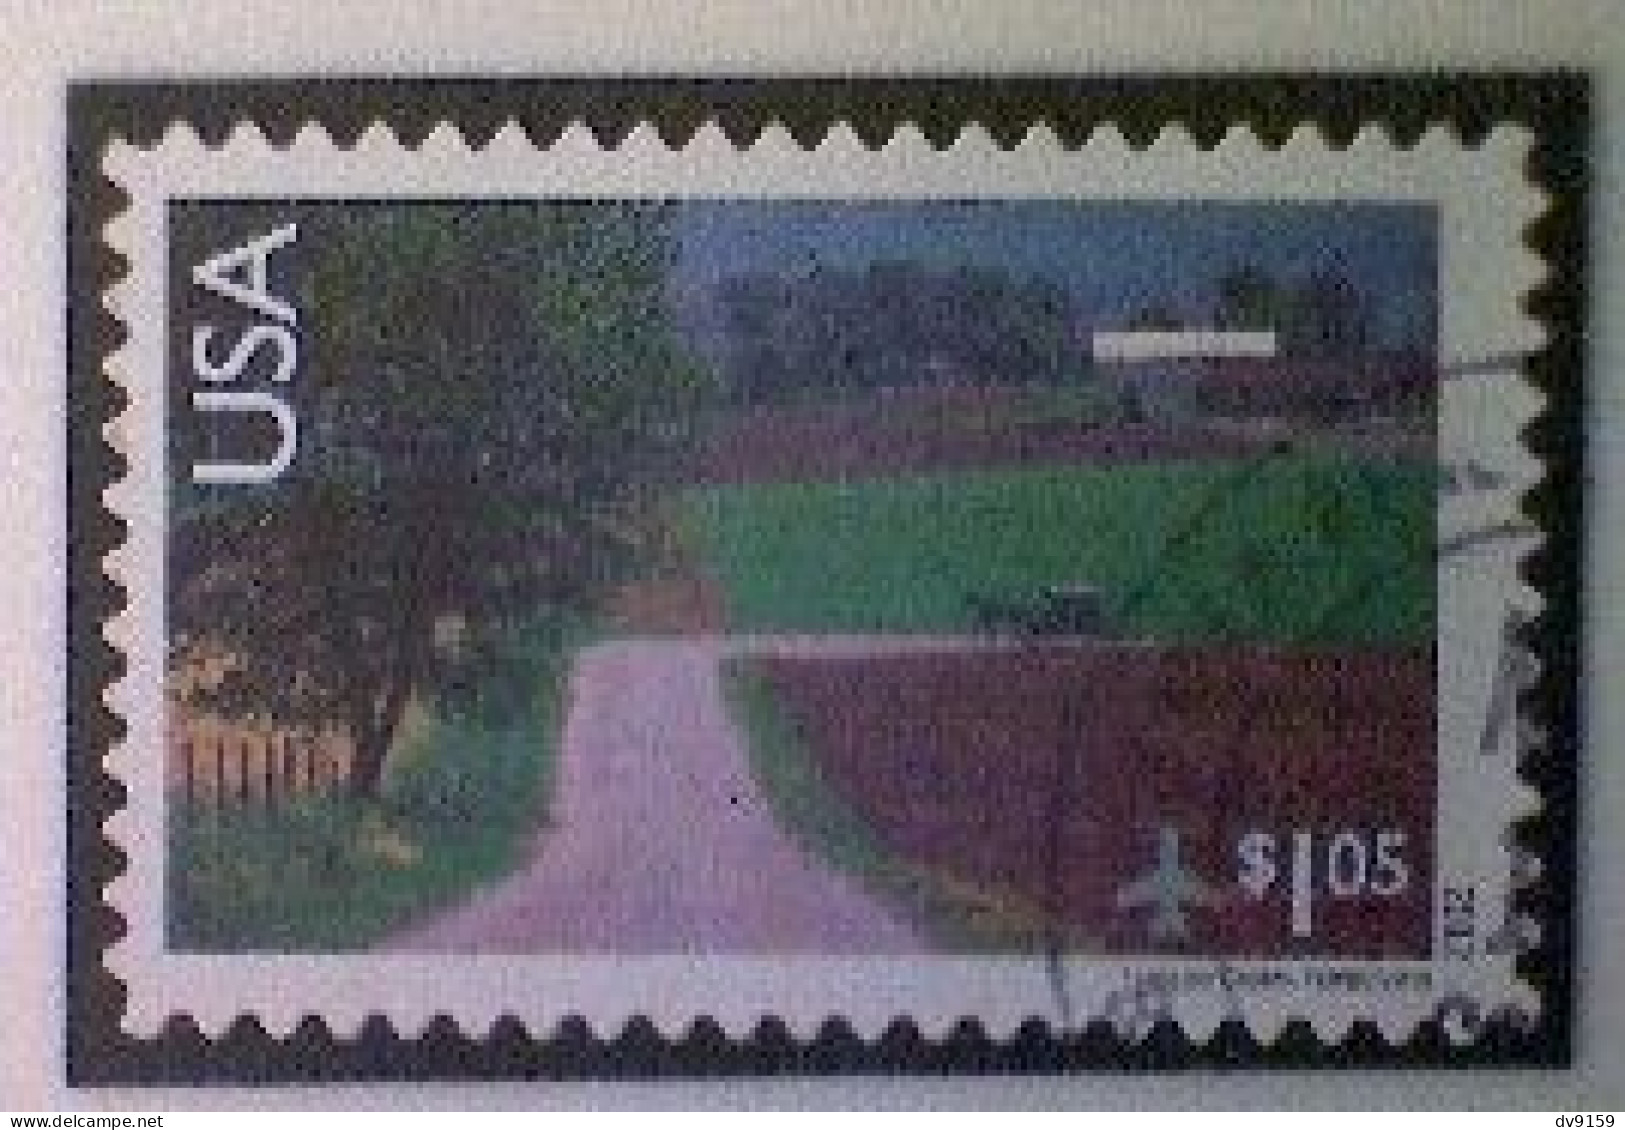 United States, Scott #C150, Used(o), 2012 Air Mail, Amish Horse And Buggy, $1.05, Multicolored - 3a. 1961-… Gebraucht